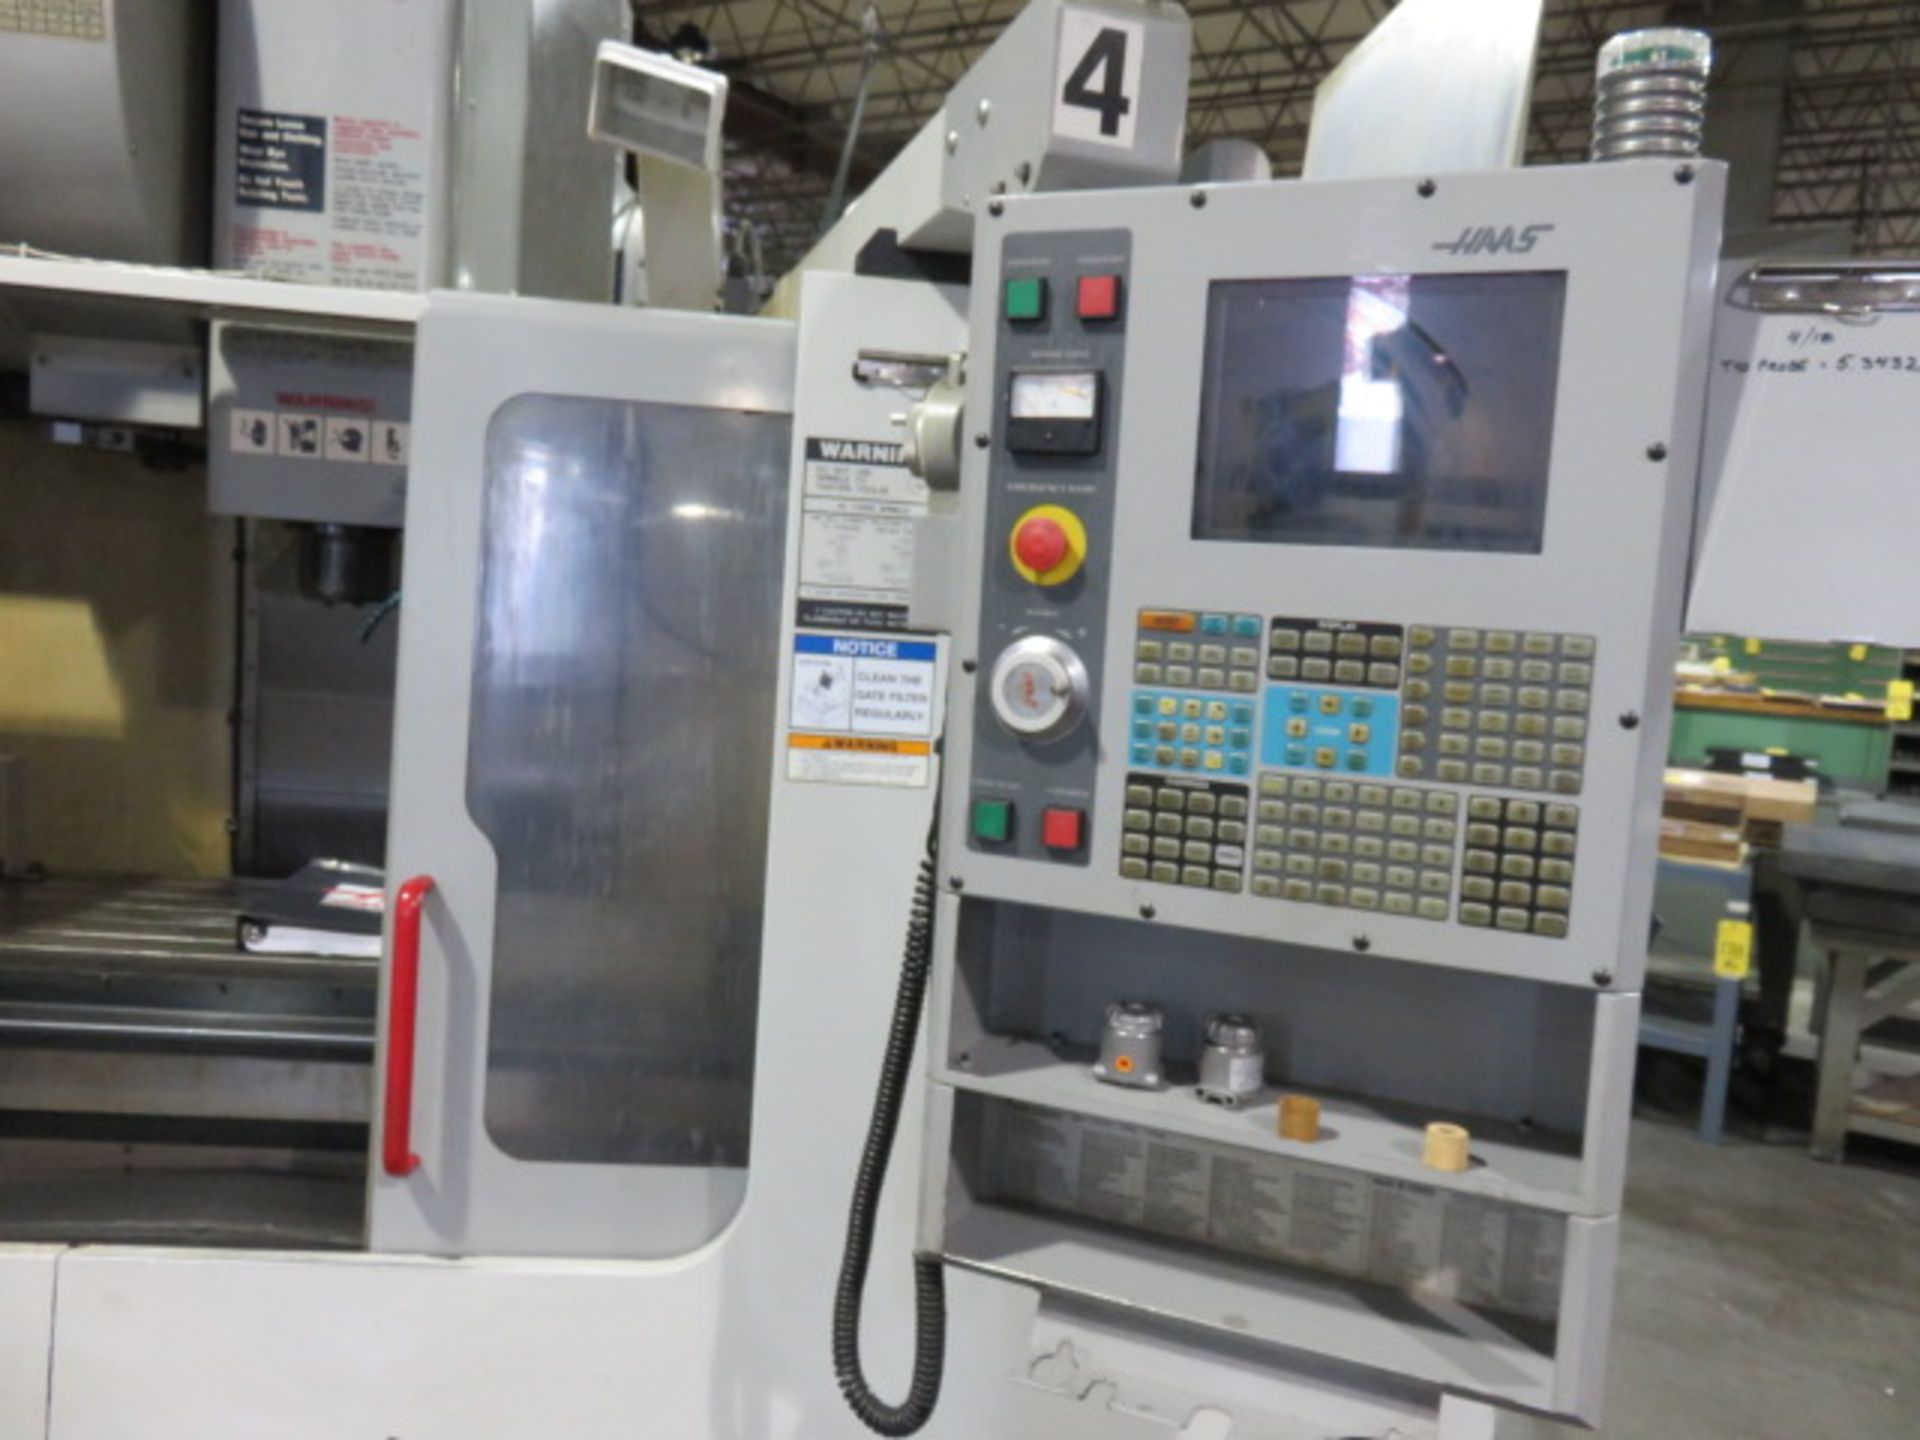 2003 HAAS VF-4B CNC VERTICAL MACHINING CENTER, S/N 33031, 11,462 HOURS, LINEAR SCALES - Image 2 of 5